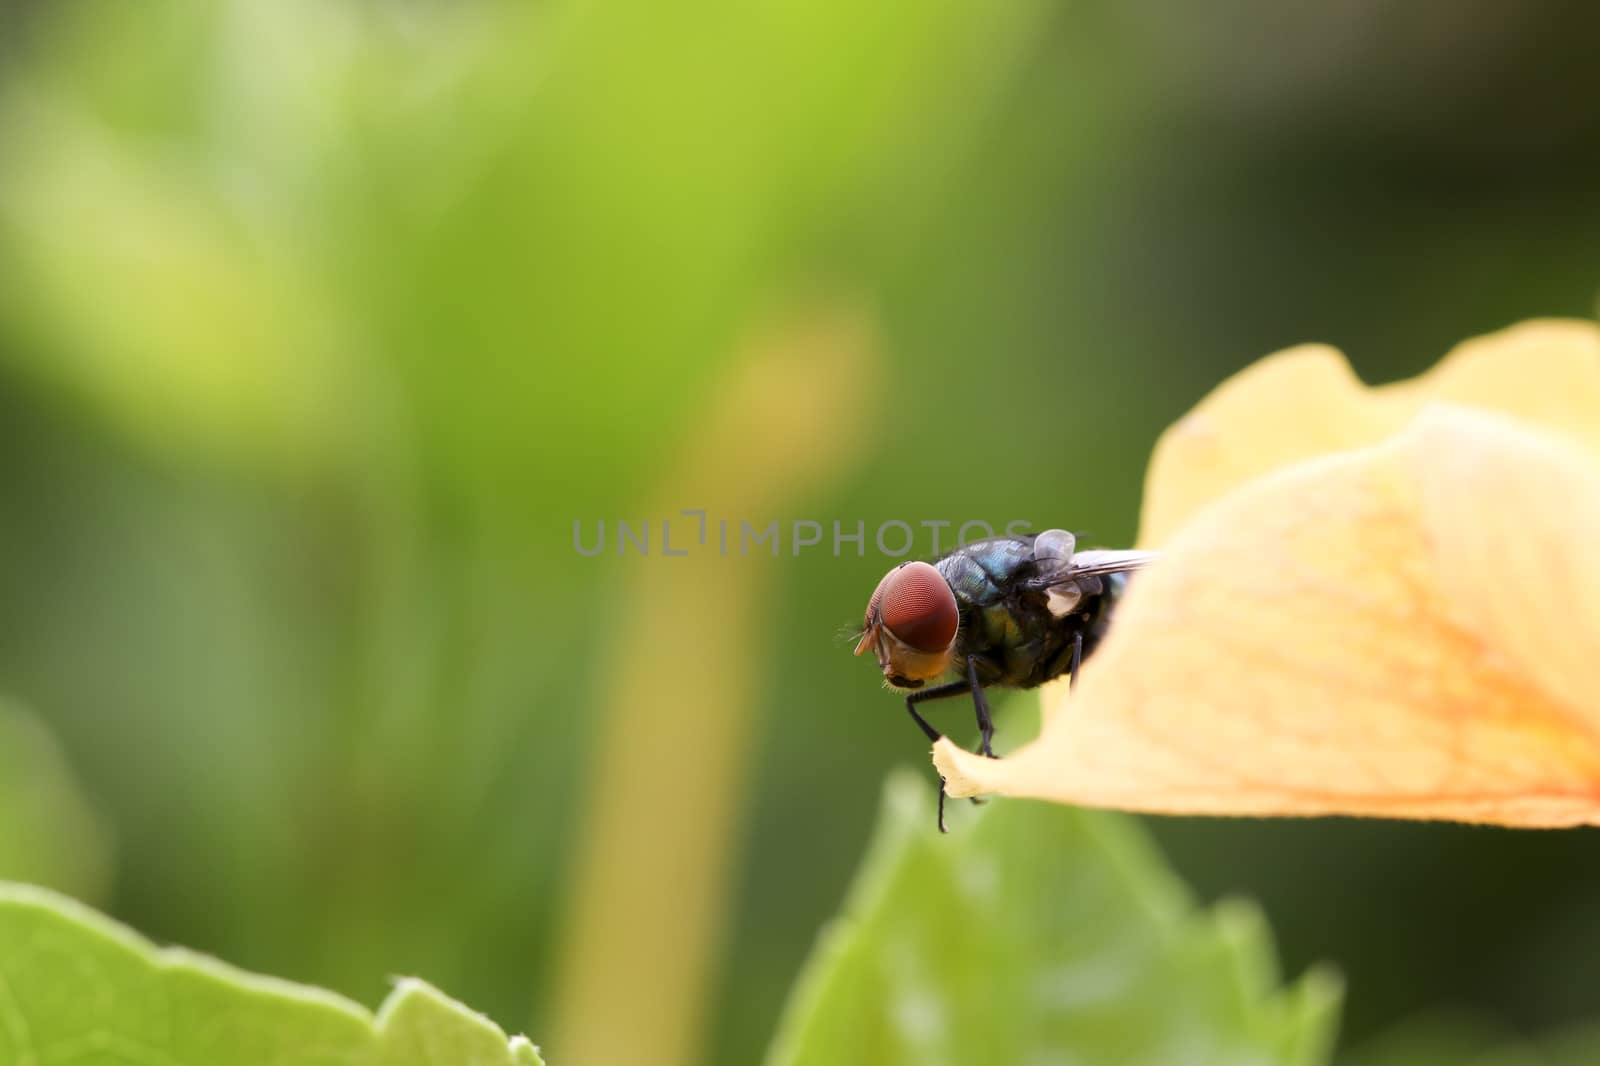 Fly on the hibiscus petals was shot in nature